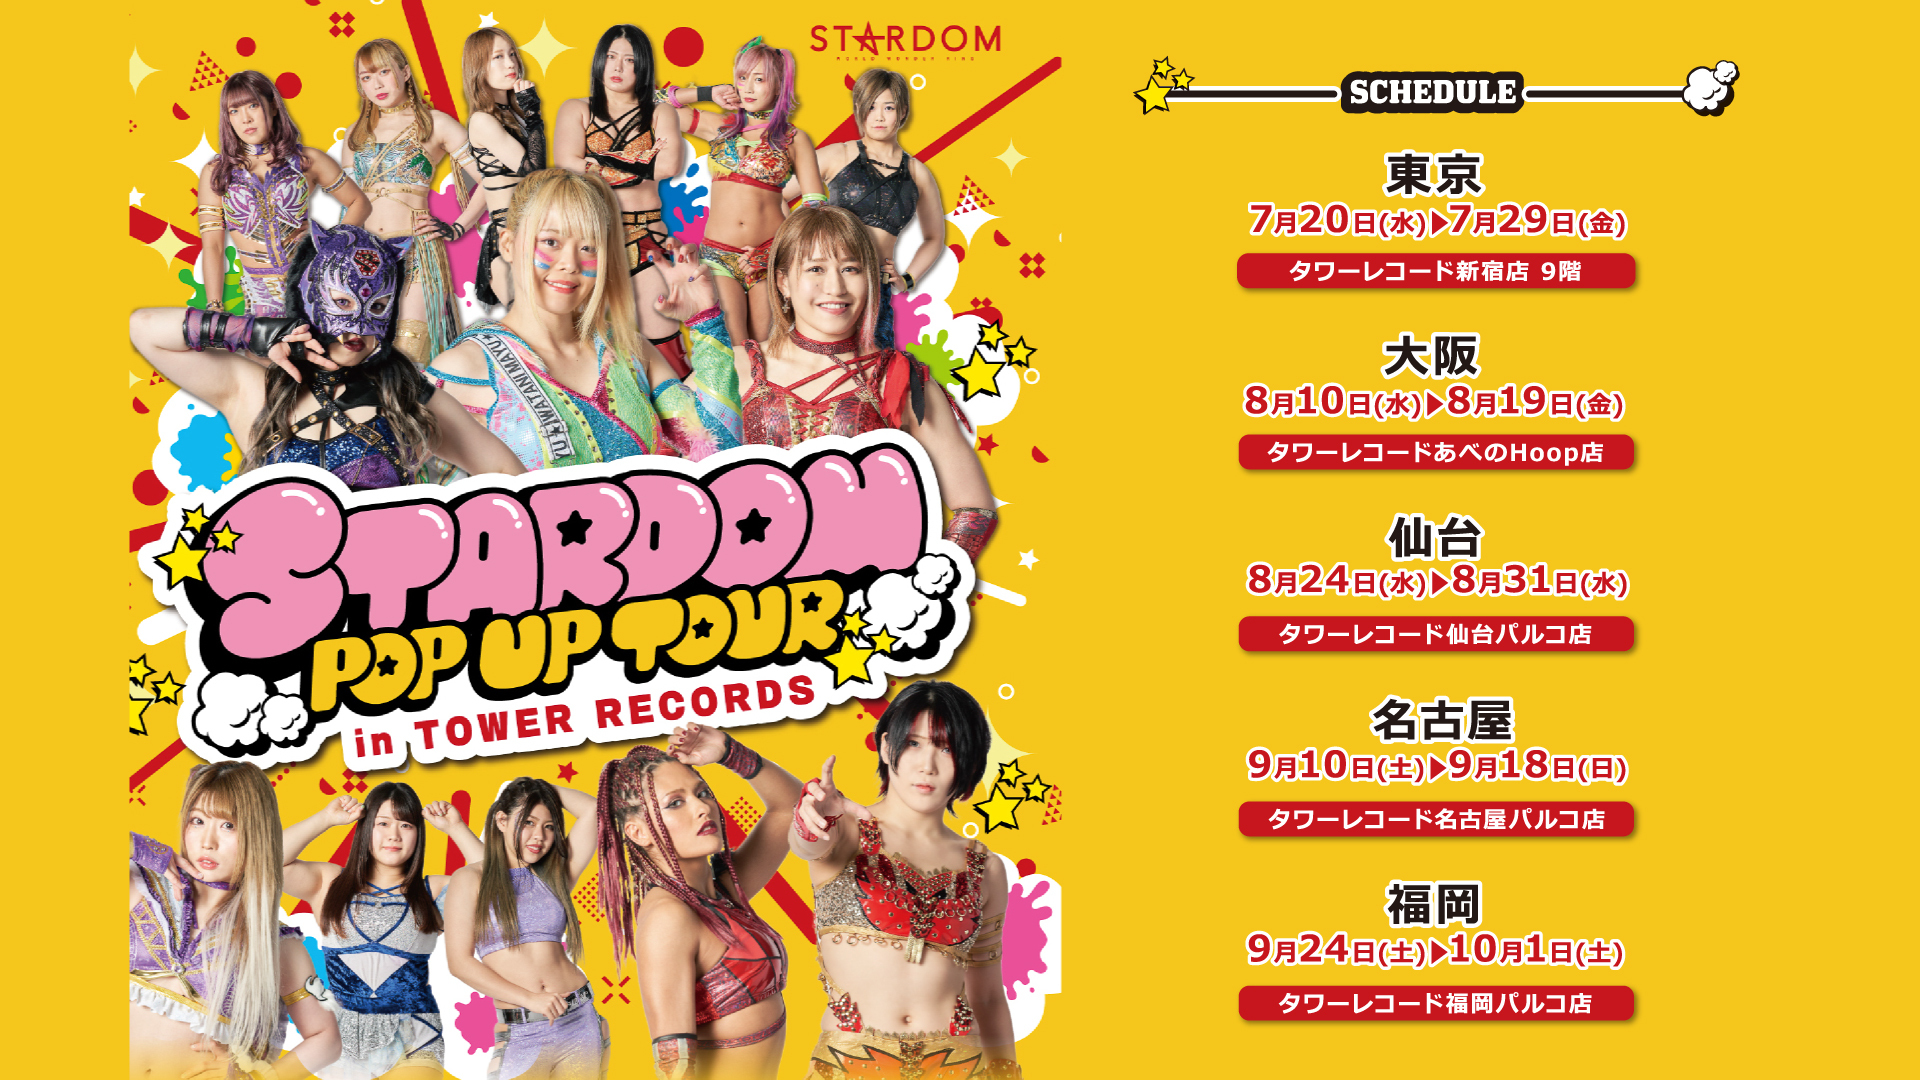 NEWS】STARDOM POP UP TOUR in TOWER RECORDS グッズ情報解禁！ – スターダム✪STARDOM